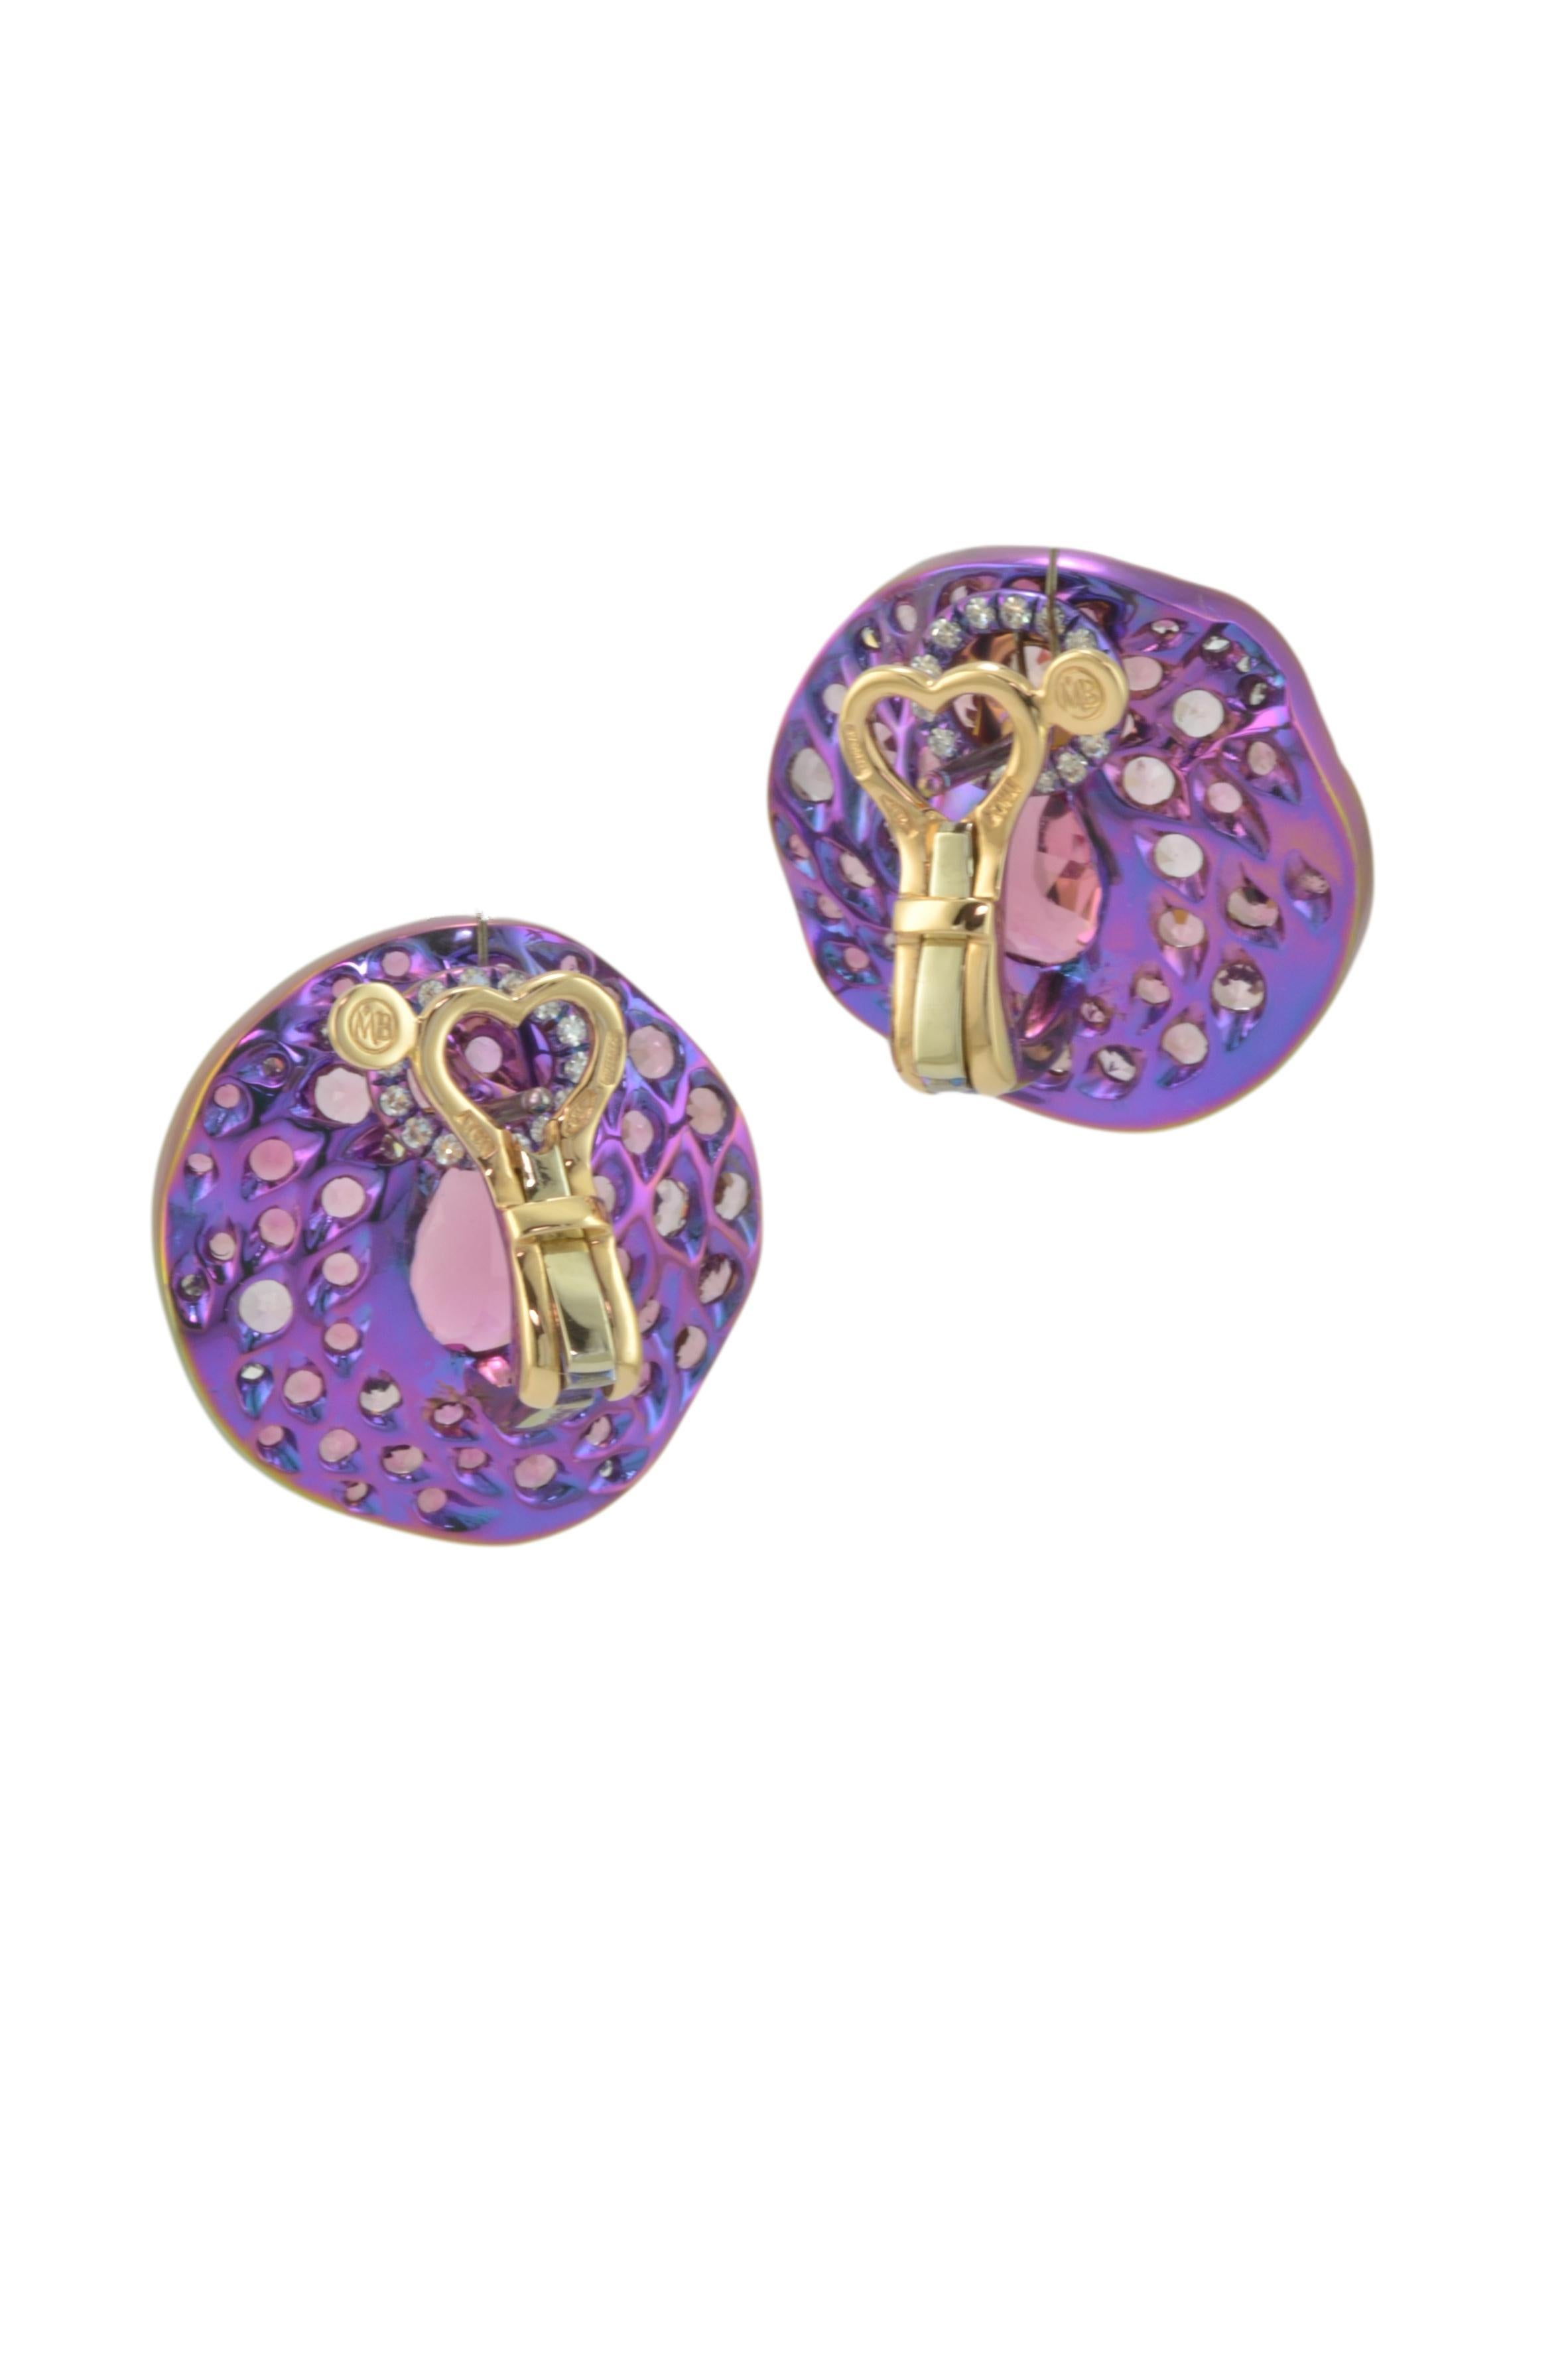 Round Cut Tourmaline Pink Sapphires Diamond 18KT Rose Gold Titanium Made in Italy Earrings